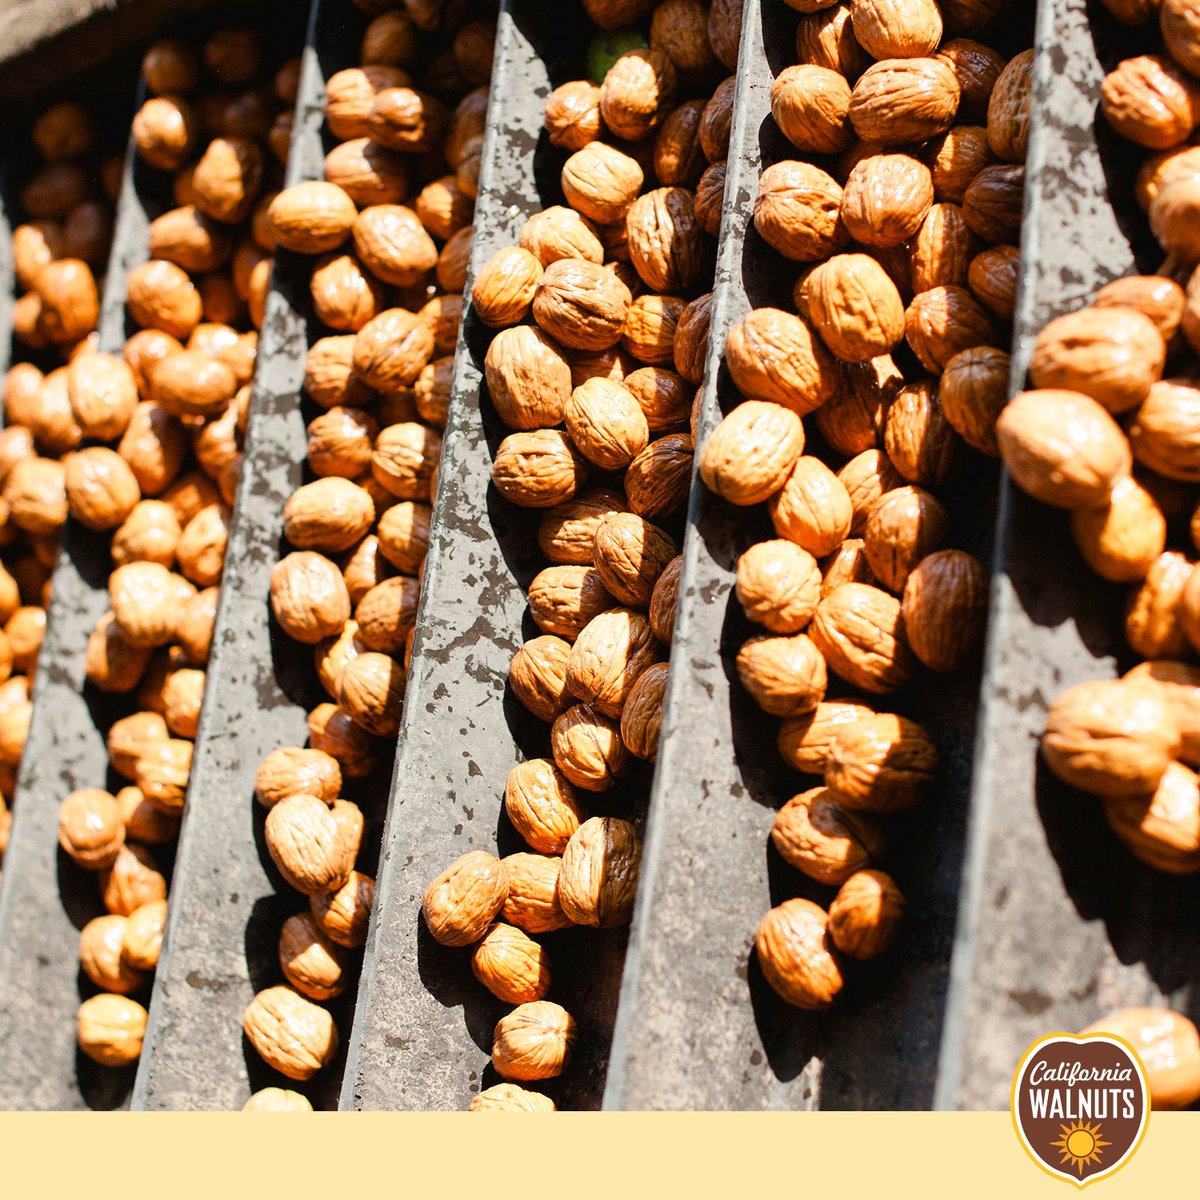 #QualityFirst 
At #CaliforniaWalnuts, we believe in not only setting the quality bars high but also exceeding it! Our produce goes through rigorous quality checks to ensure they surpass quality standards set by the California state and the US Department of Agriculture. 
#PureGold